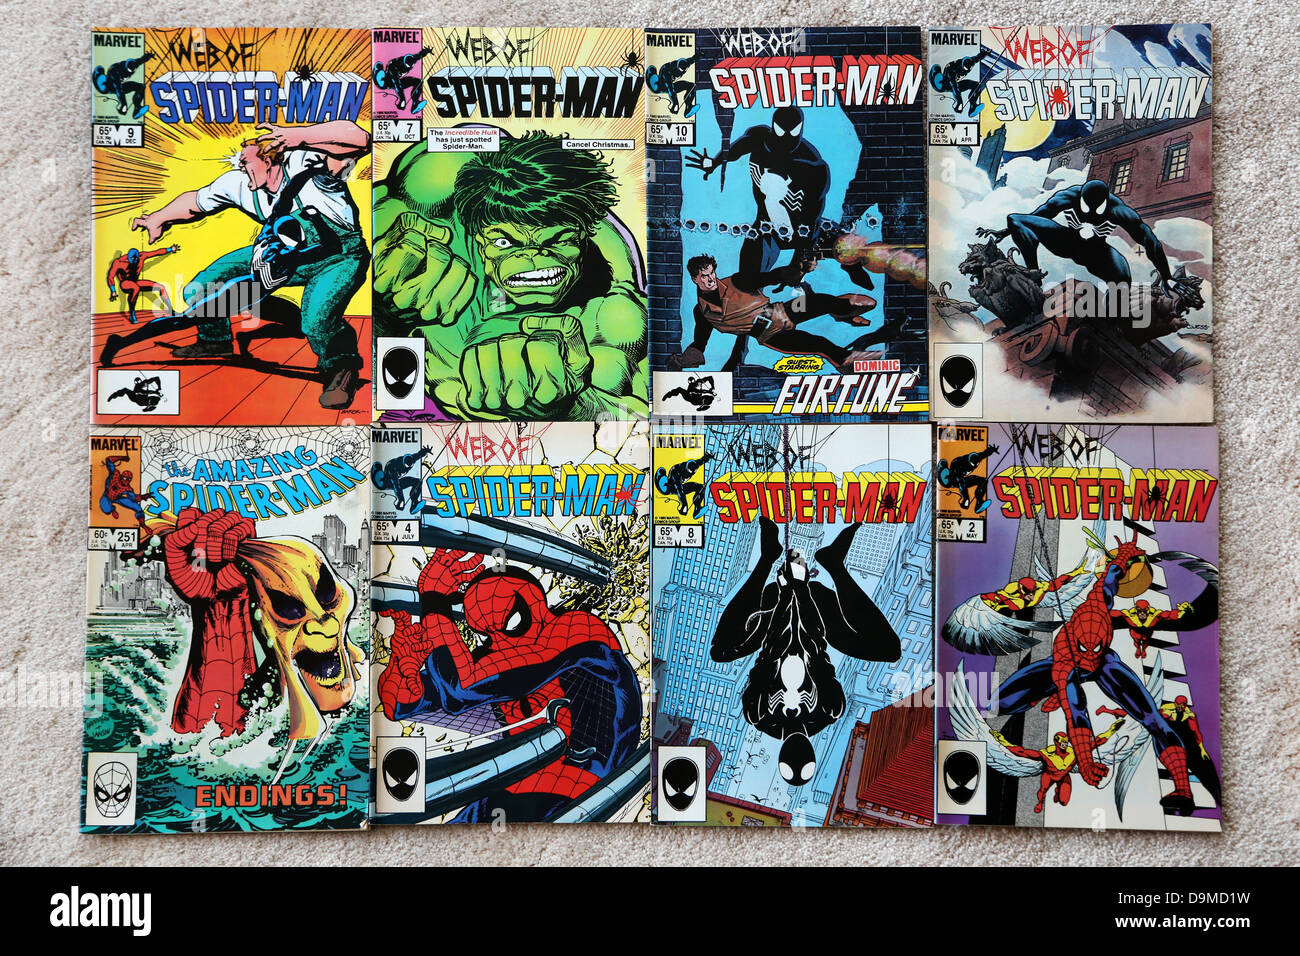 Collection Of Marvel Comics The Web Of Spider-man And The Amazing Spider-man Stock Photo